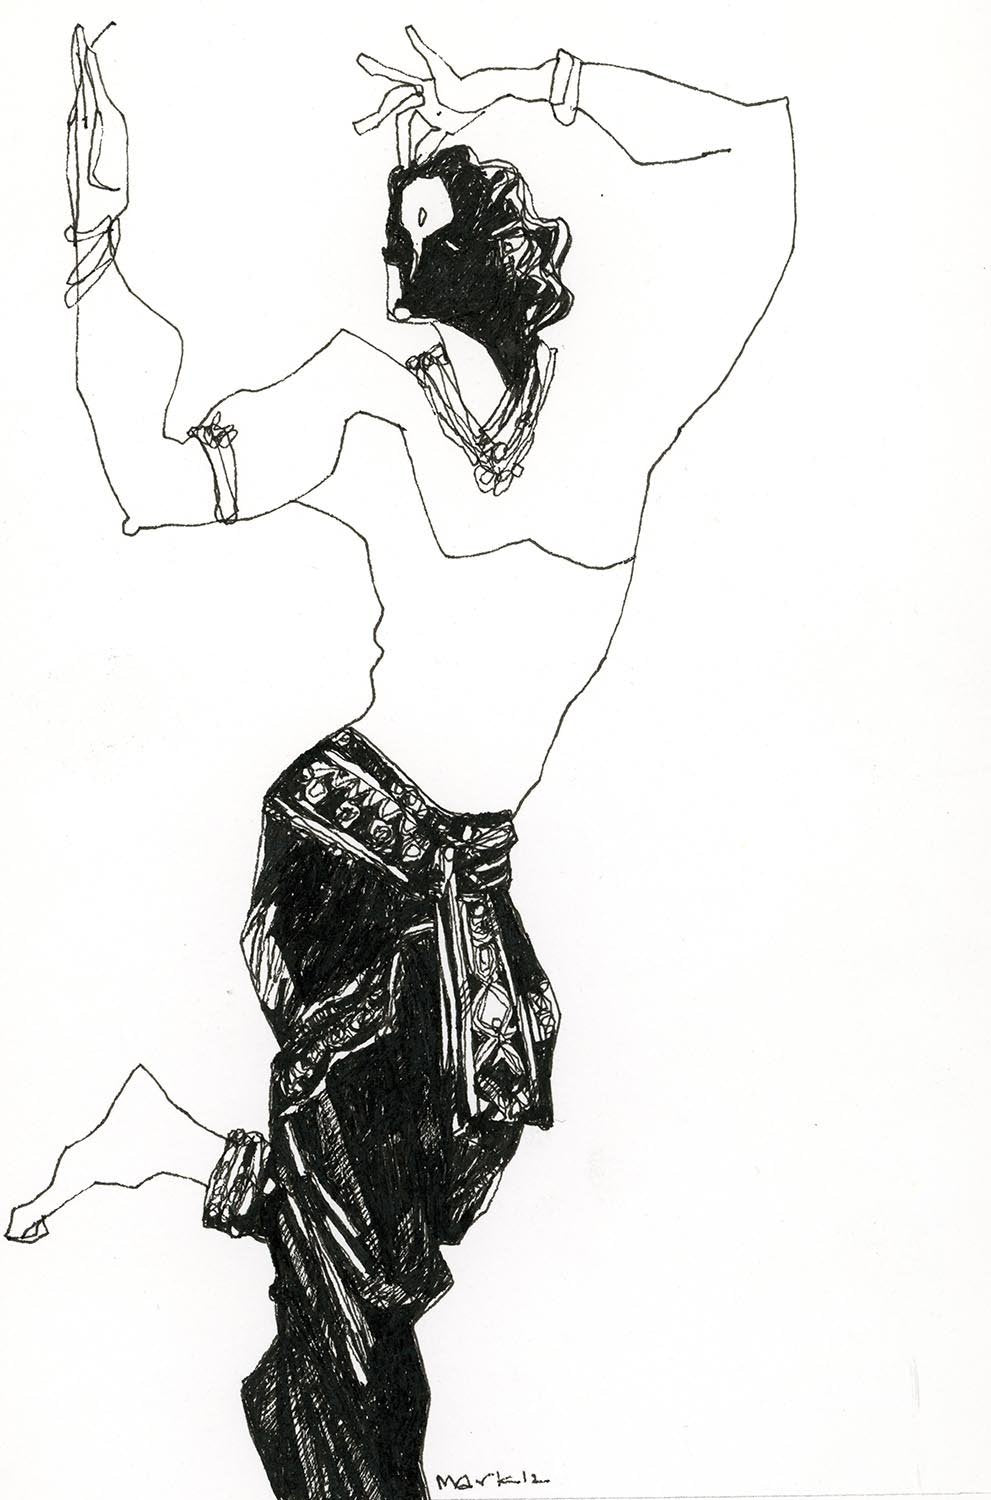 Performer 200|S. Mark Rathinaraj- Pen and Ink on Paper, , 8.5 x 5.5 inches